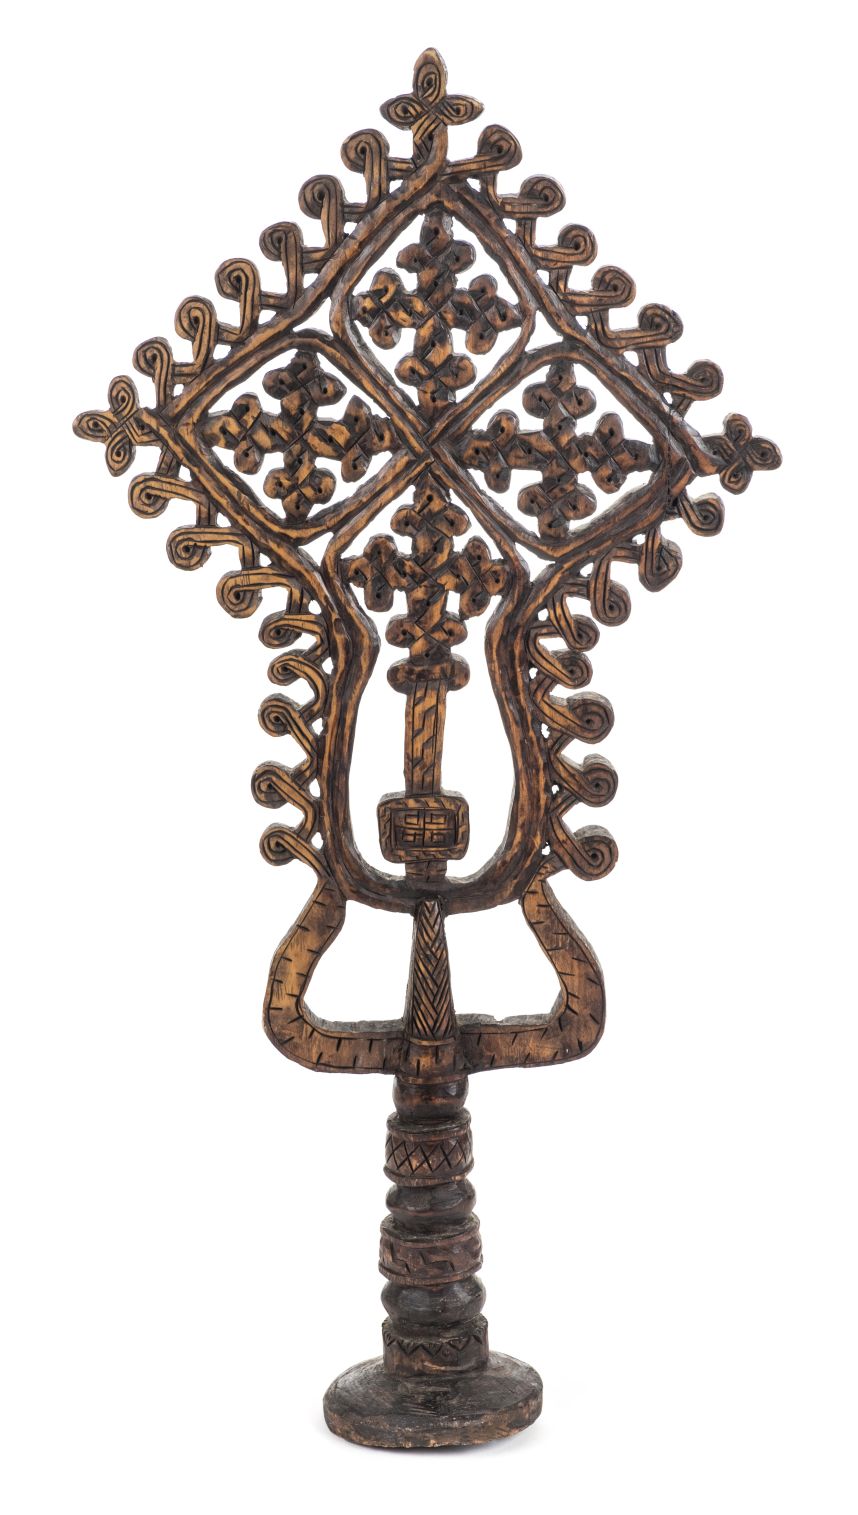 *Ethiopia. Ethiopian carved wood Coptic hand cross, intricately carved in a geometric style, 64cm